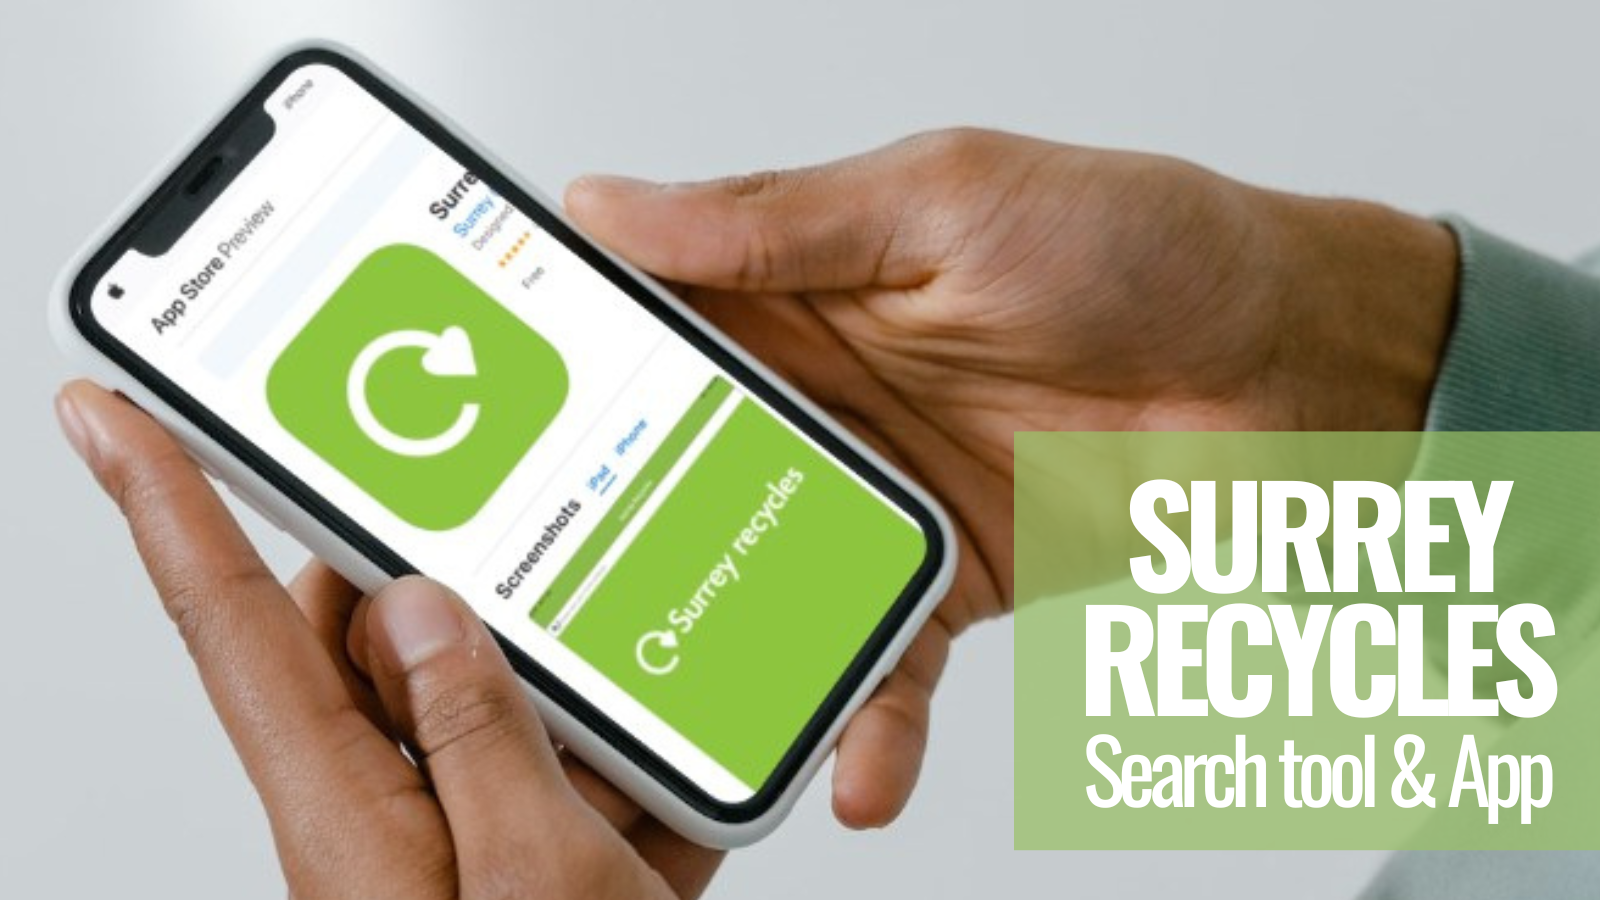 Check out our Surrey Recycles search tool & app!